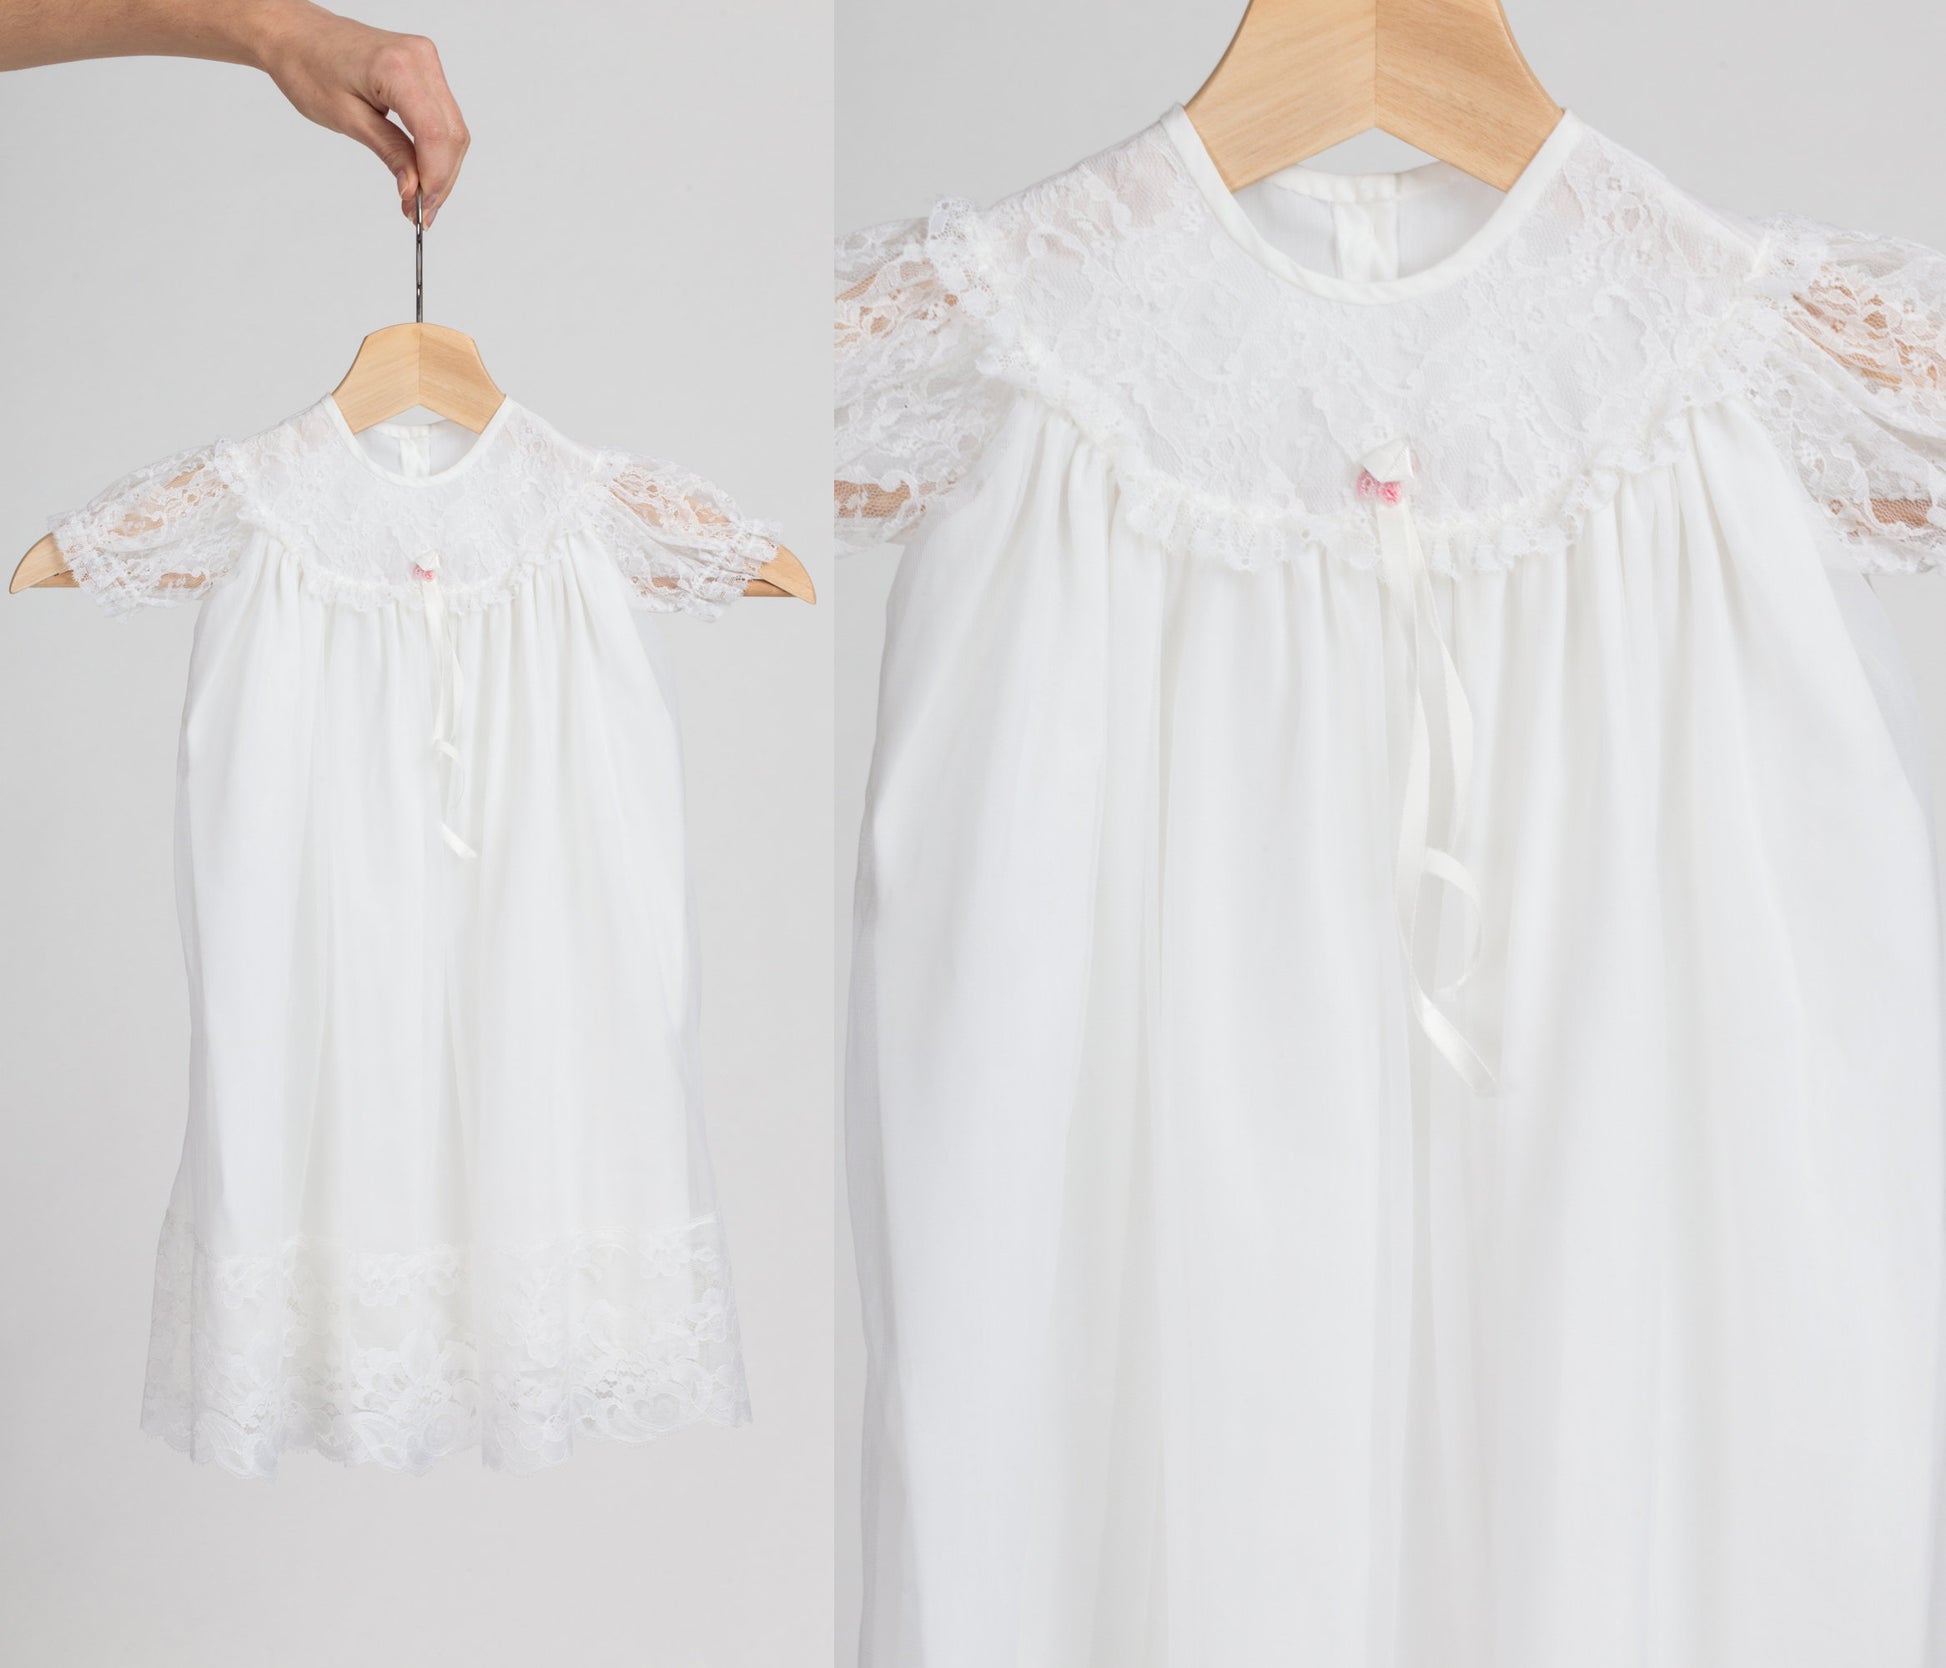 60s White Lace Baby Christening Gown | Vintage Sheer Full Length Baby Girl Dress